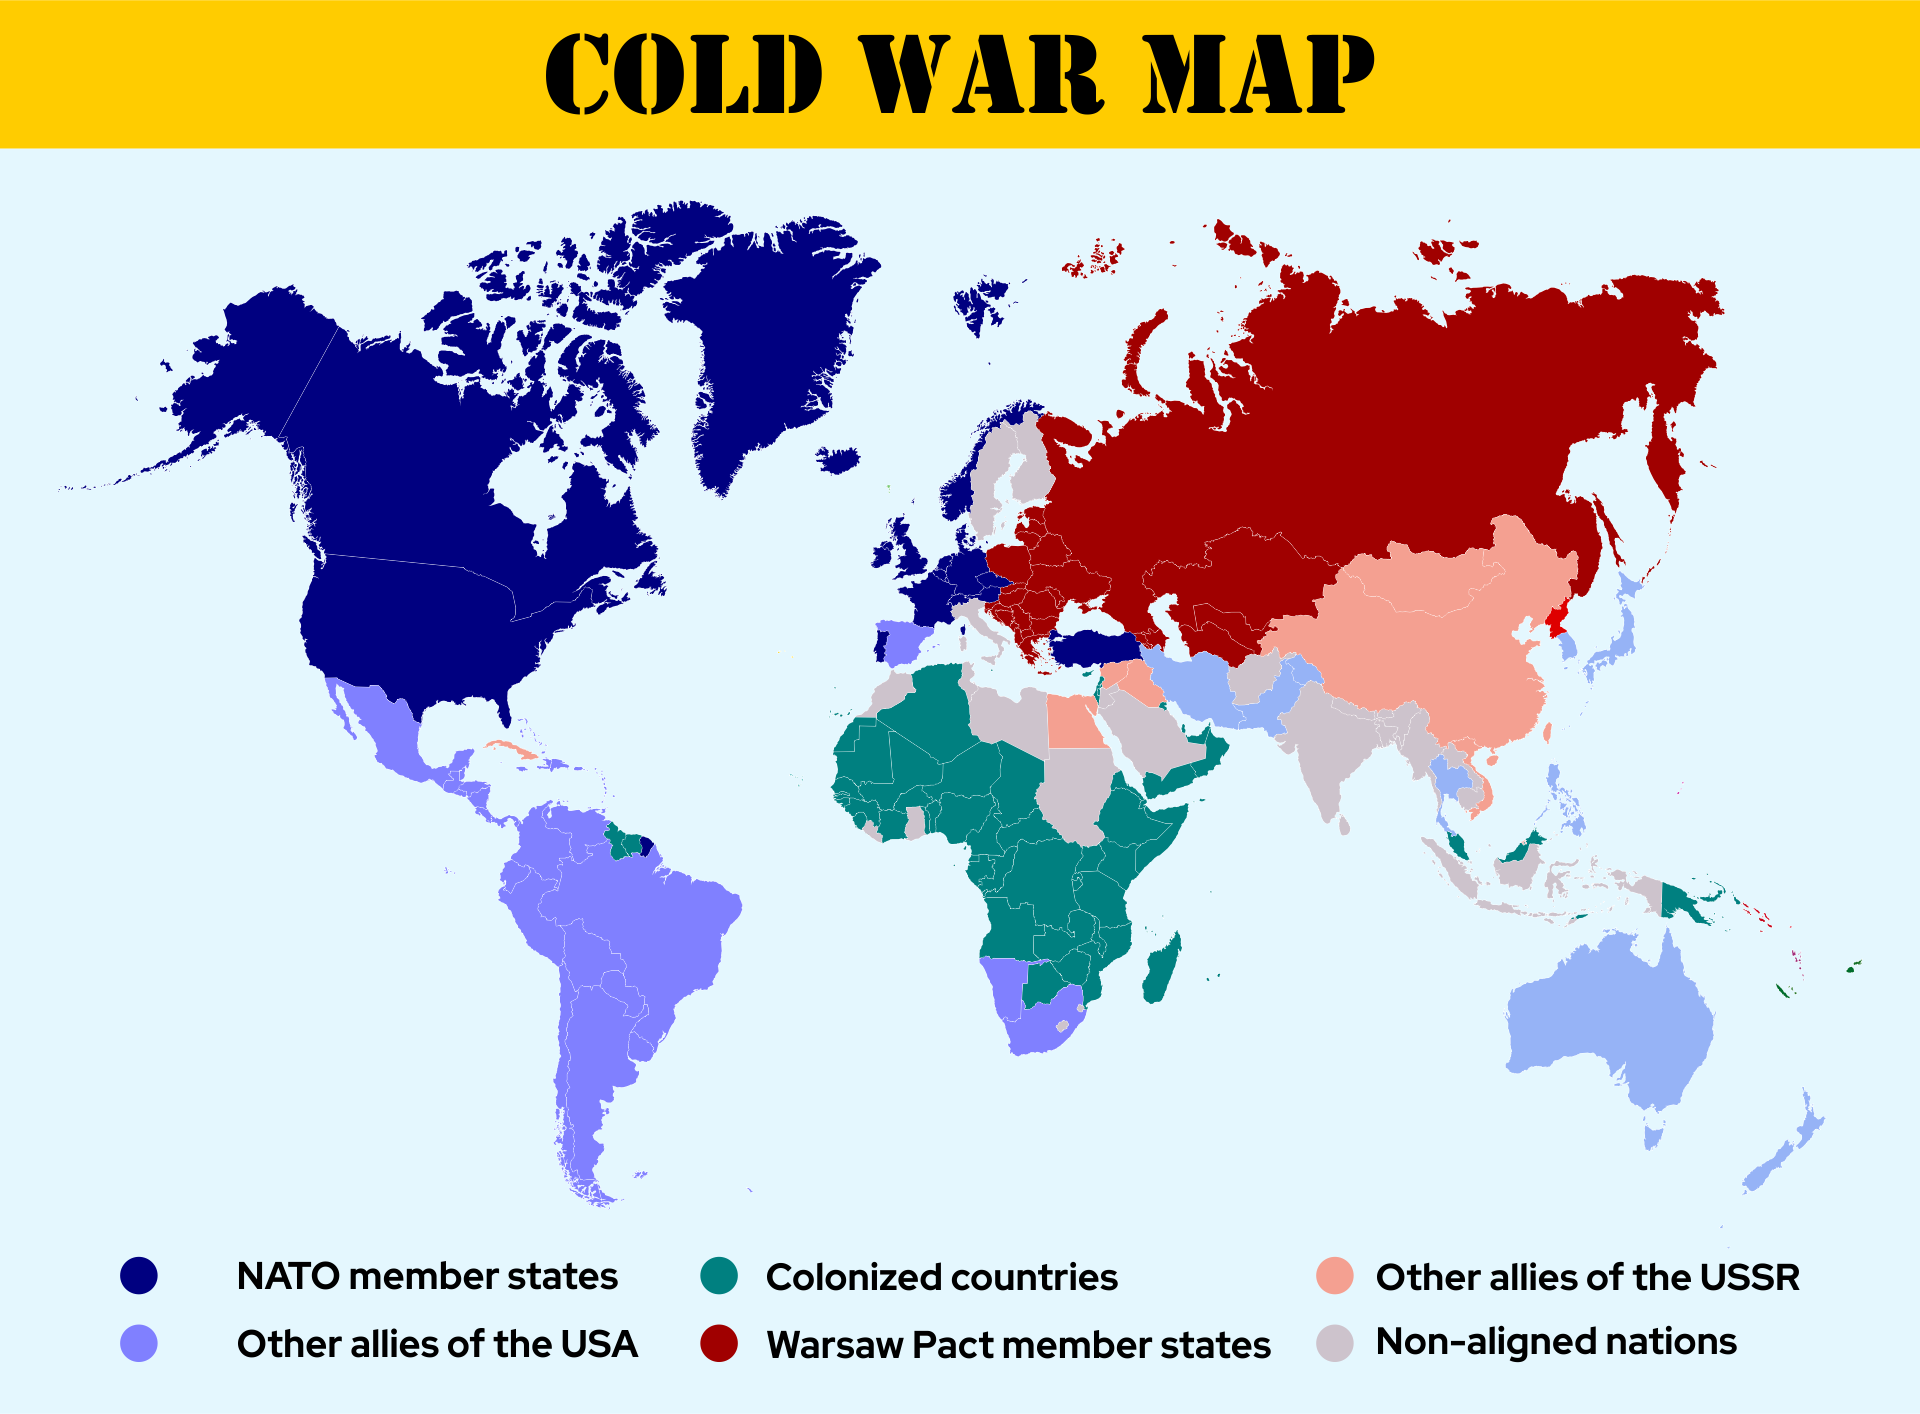 Cold War Map of the World